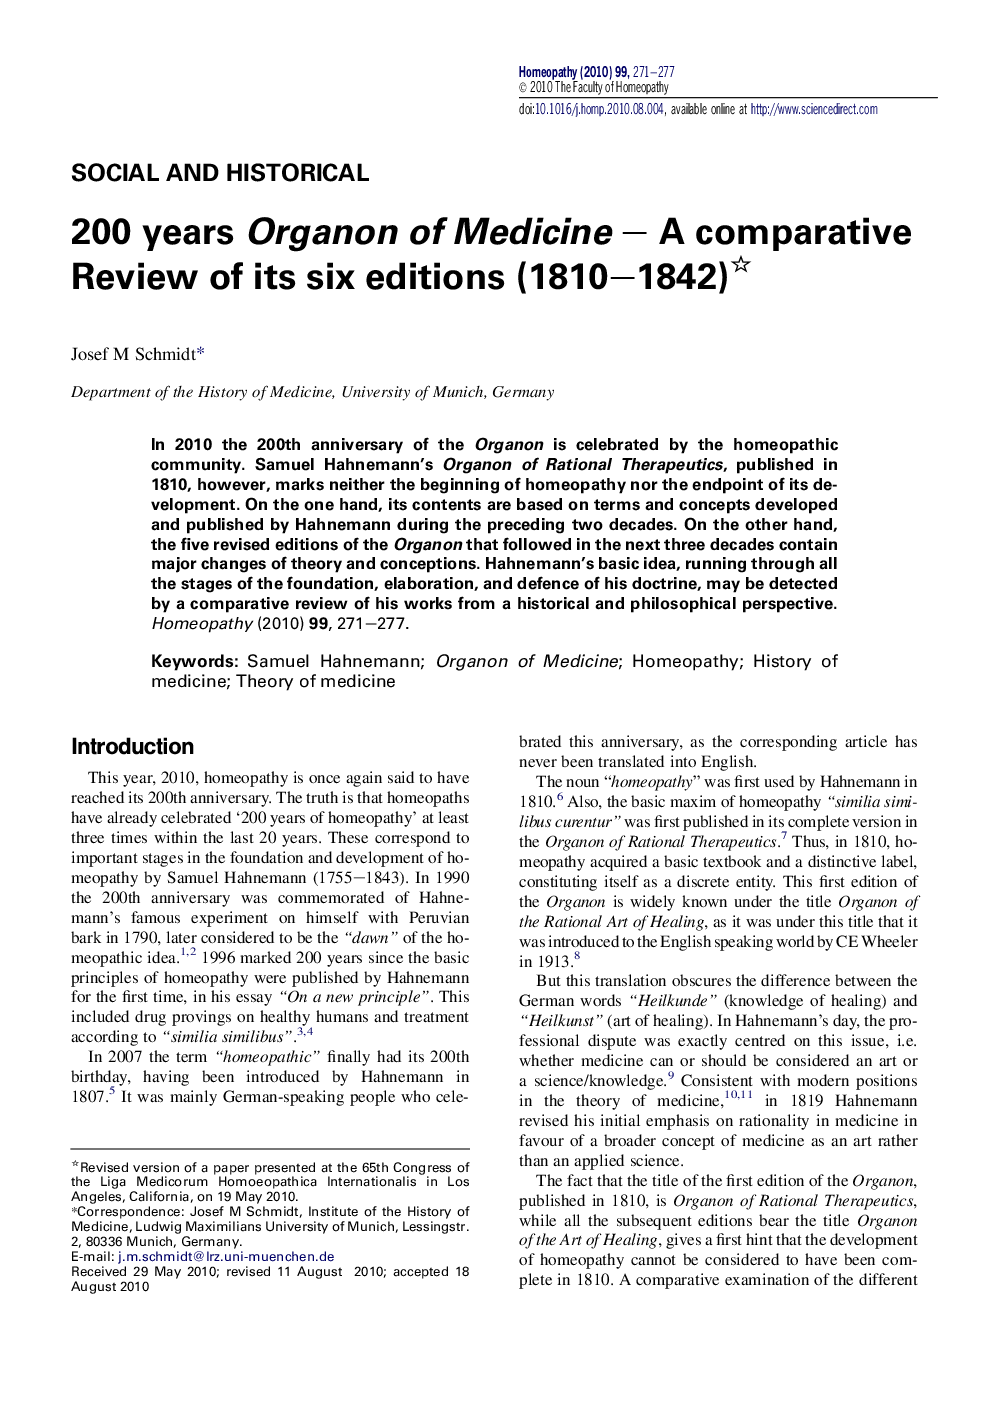 200 years Organon of Medicine – A comparative Review of its six editions (1810–1842) 